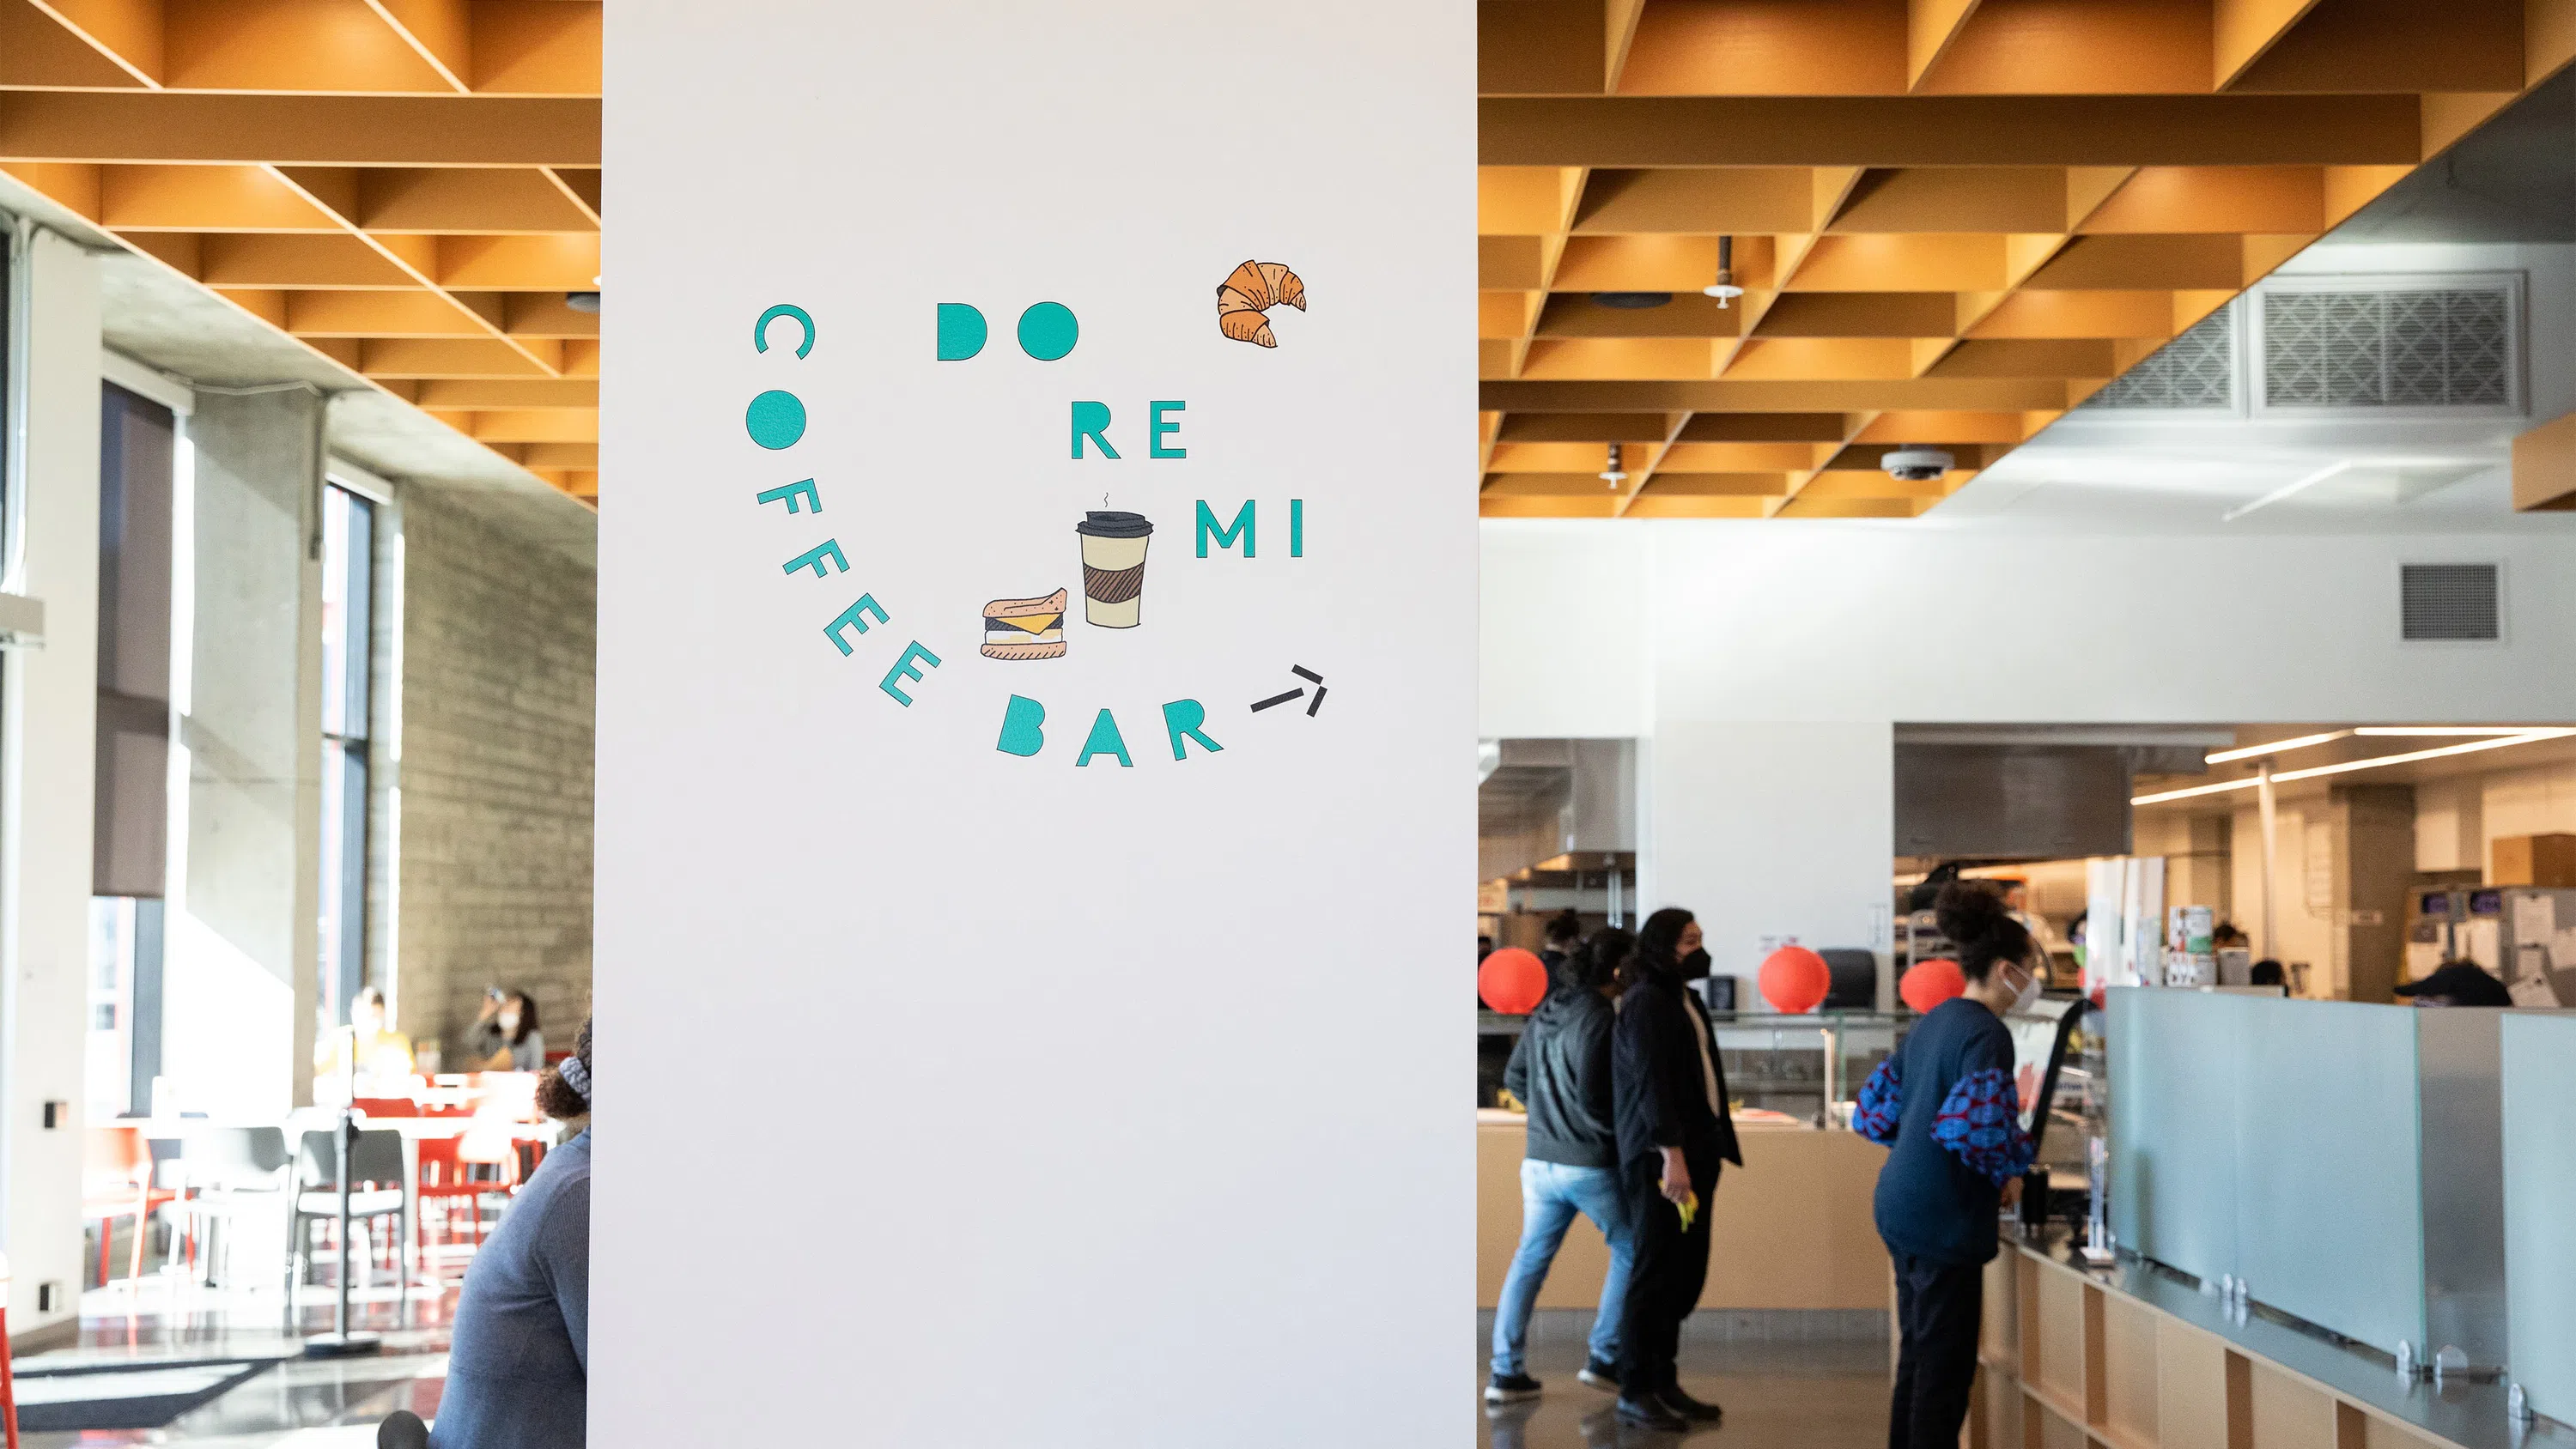 A few people order coffee at a counter. A pillar in the center of the frame reads DoReMi Coffee bar in teal vinyl.